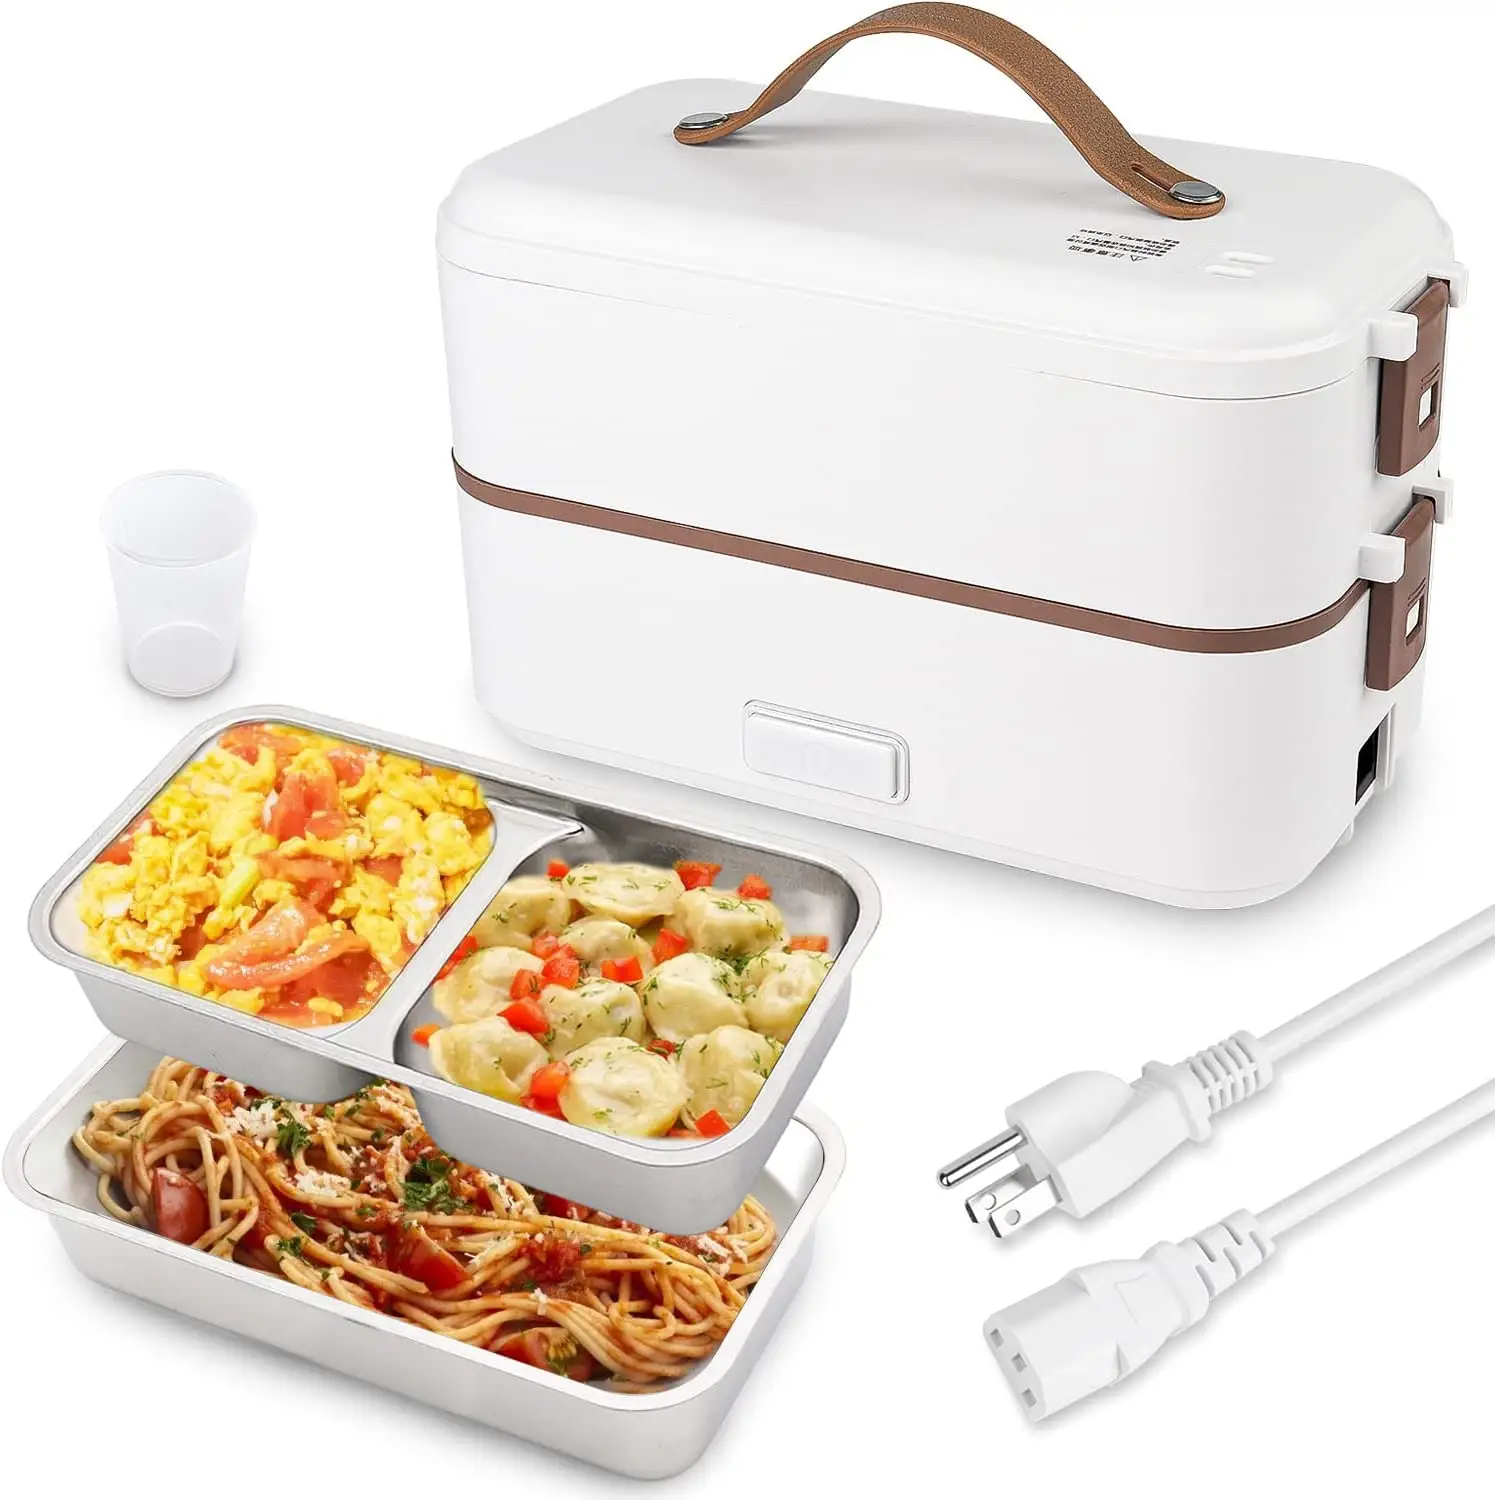 Ama-zon Food Warmer Heated Rice Cookers Electric Steamed Cooking Electric Lunch Box Portable Car Home Mini Heating 2 Layer